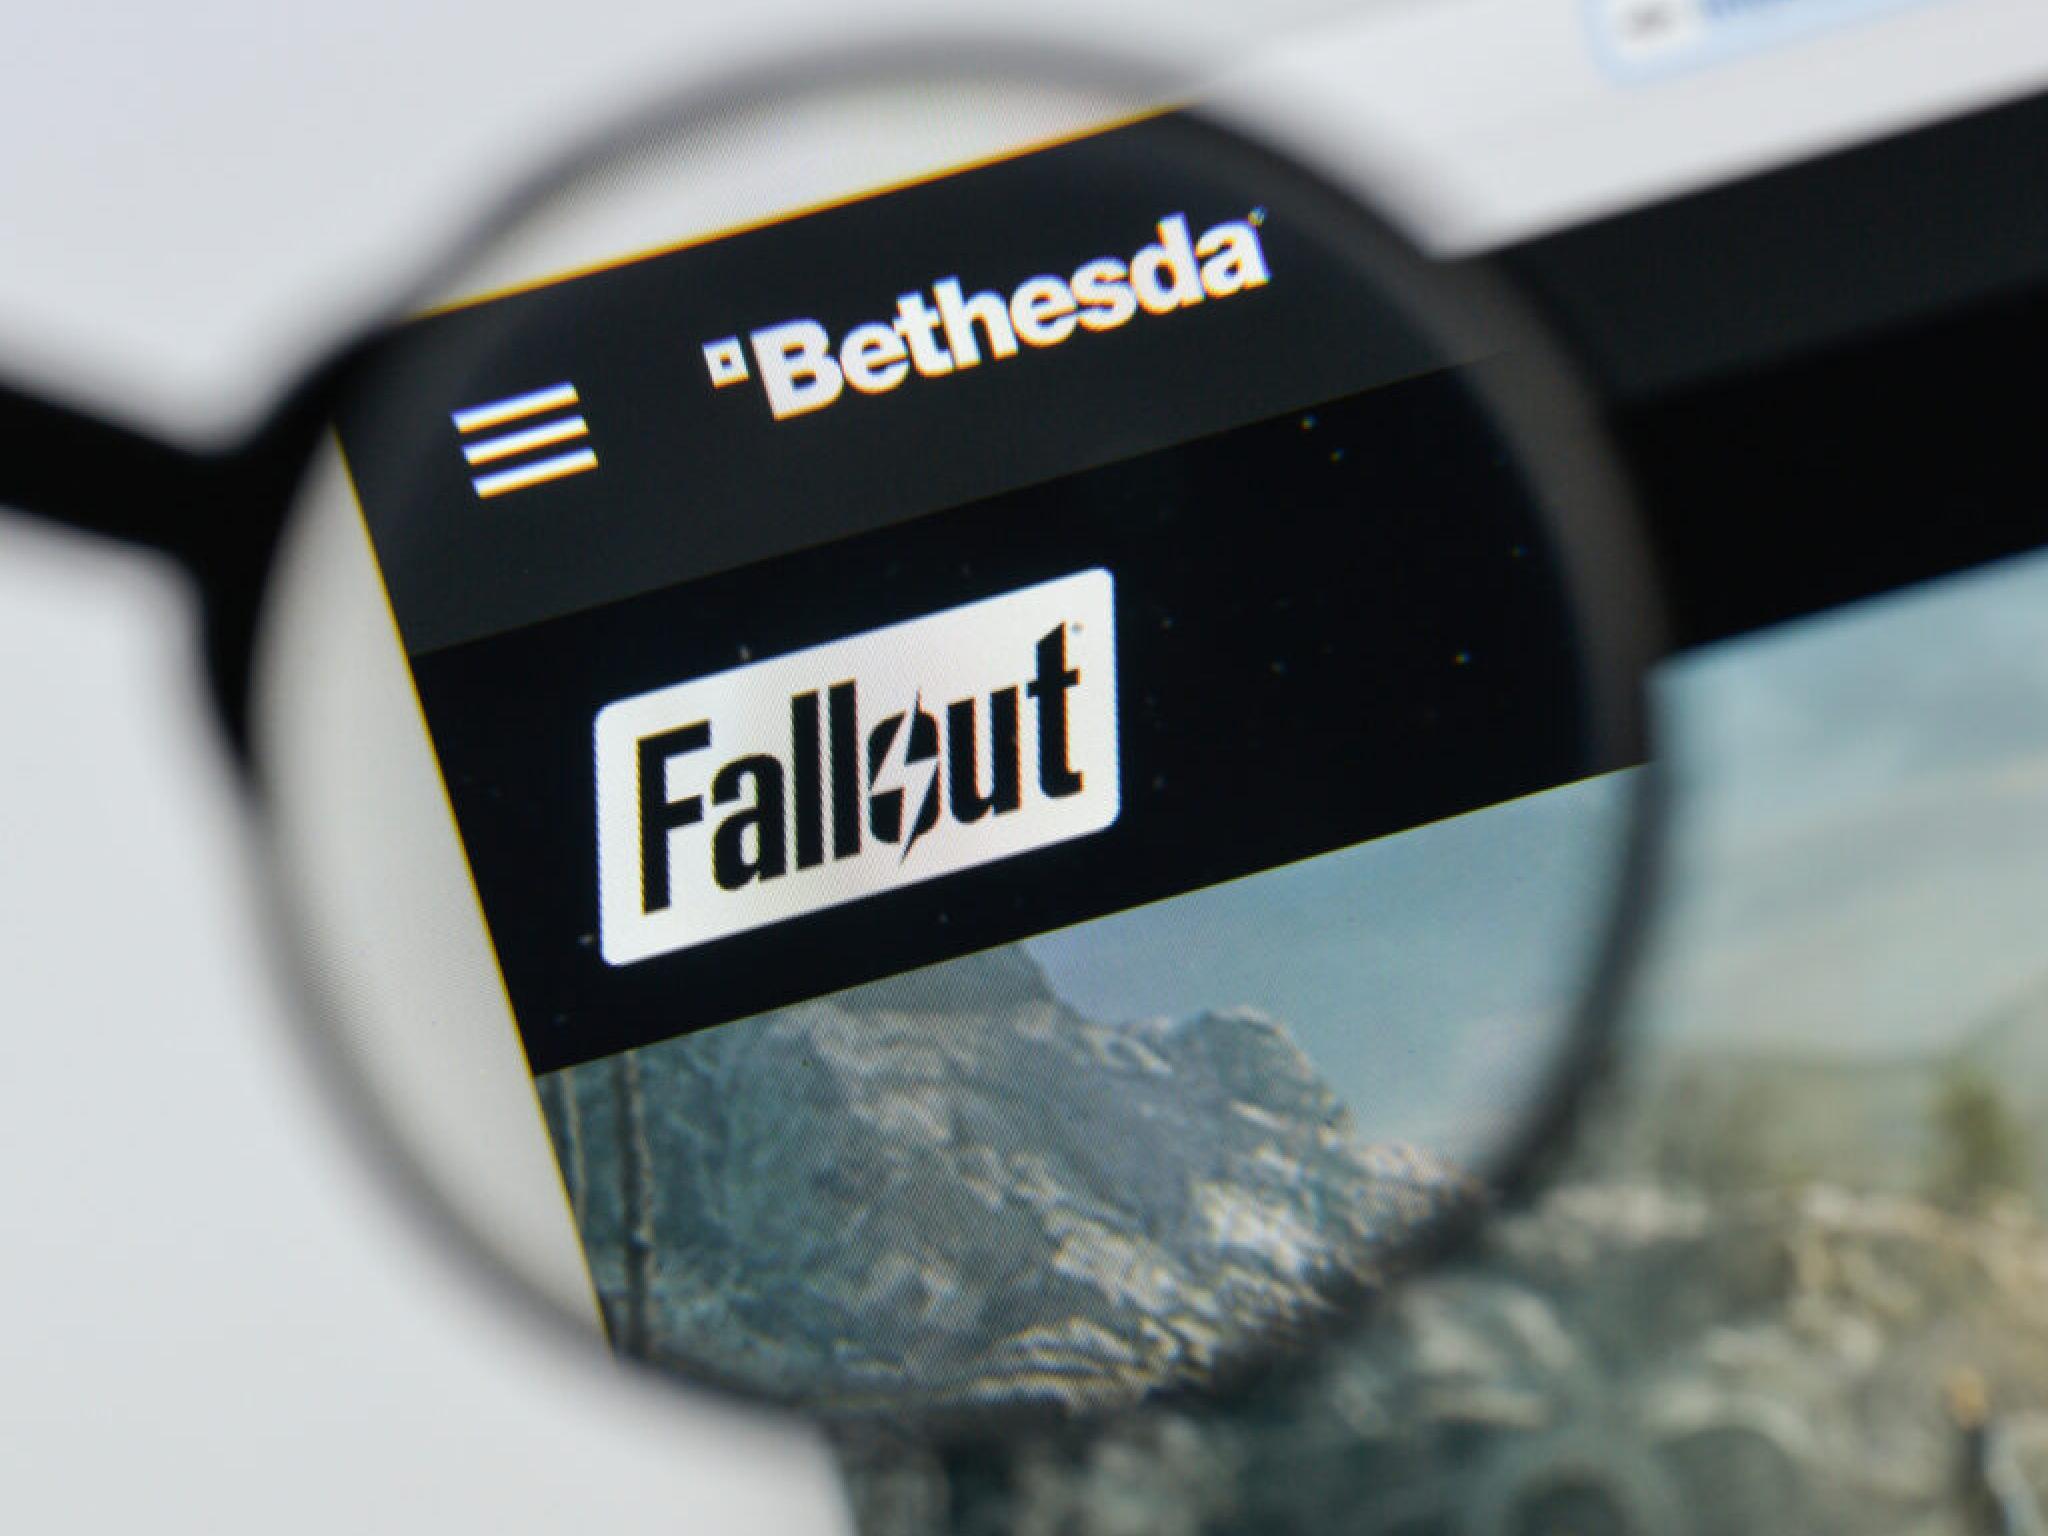  next-gen-update-for-fallout-4-owners-excludes-ps-plus-collection-bethesda-confirms 